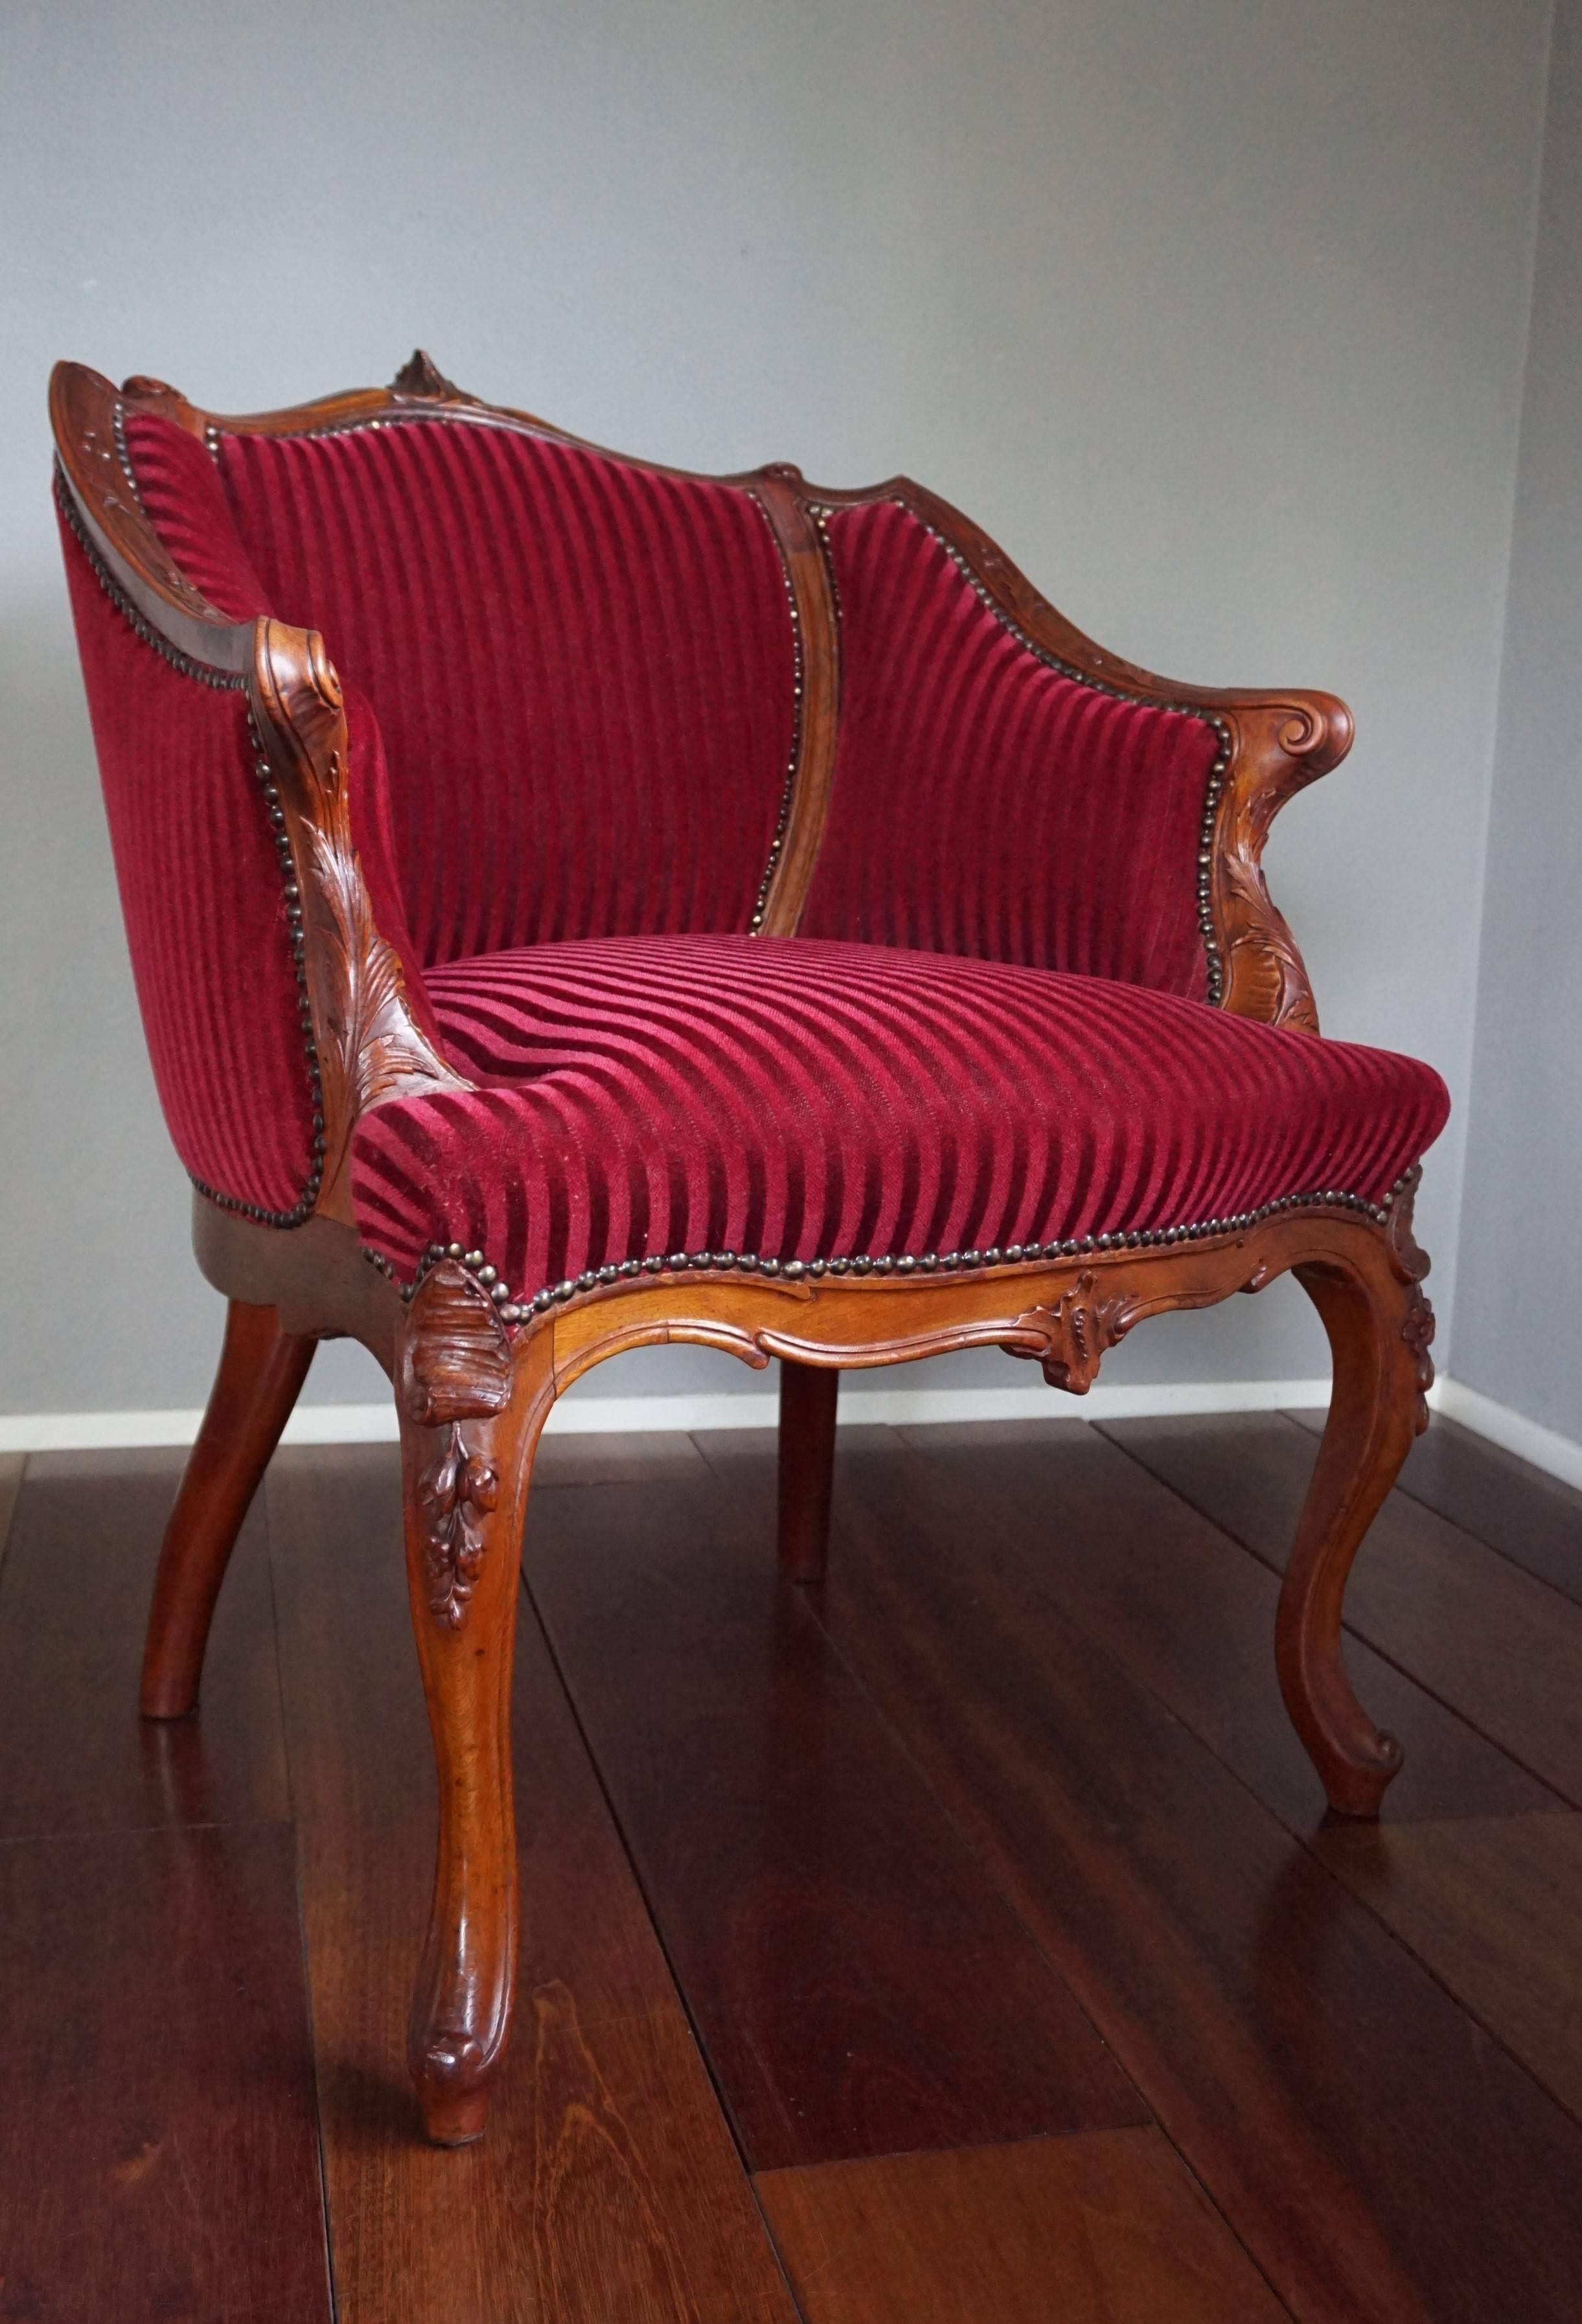 Antique and Stunning 19th Century Hand-Carved Mahogany and Red Velour Chair 11